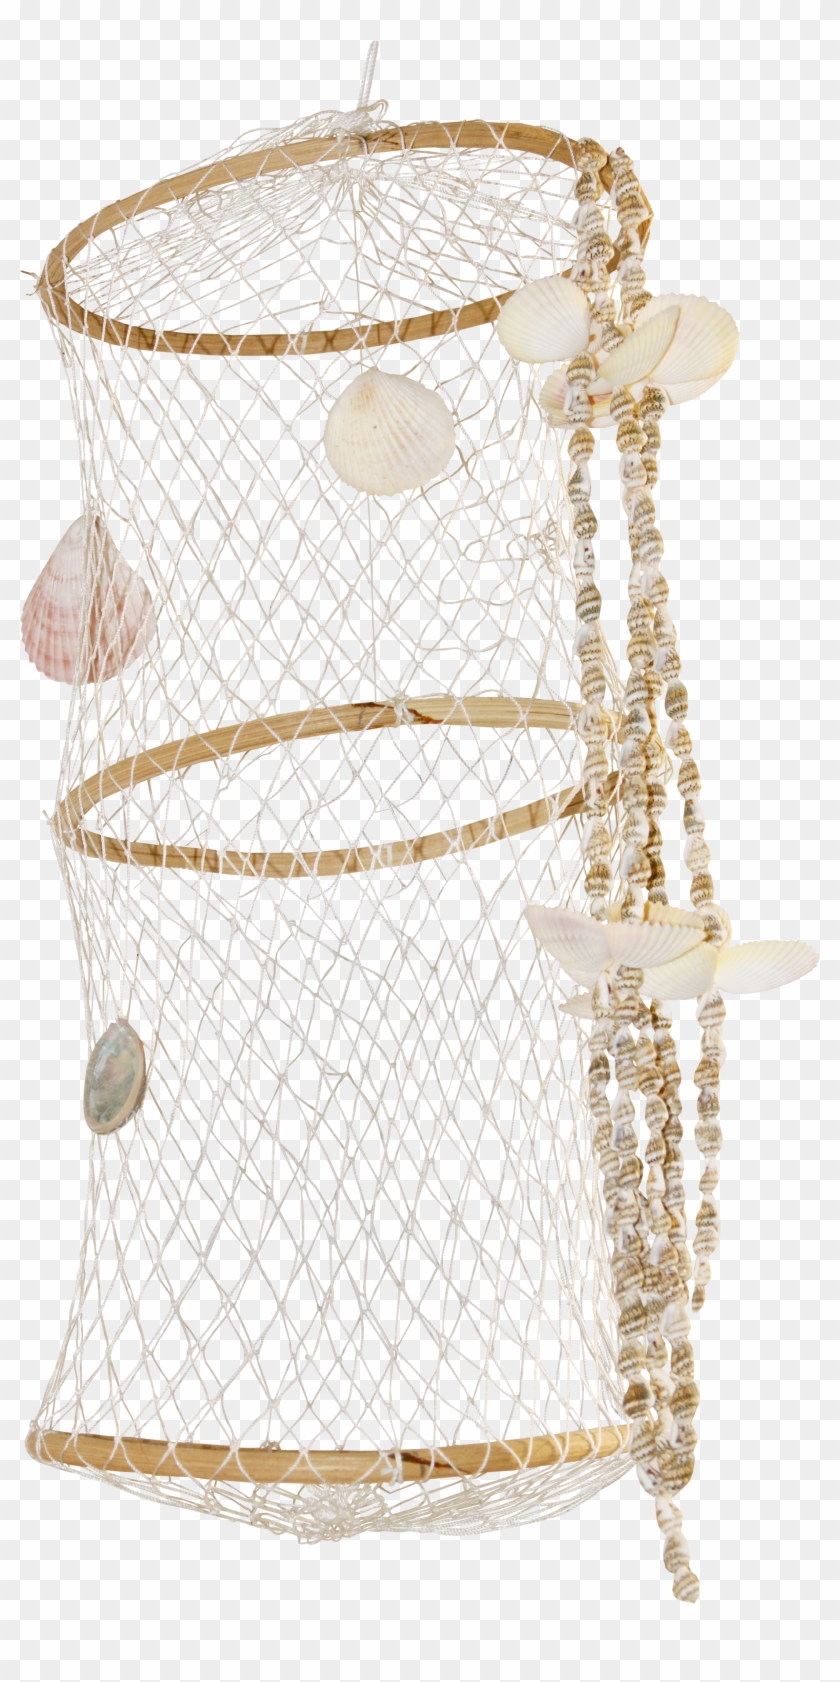 Fishing Clip Art Shell - Chain - Png Download #5522724